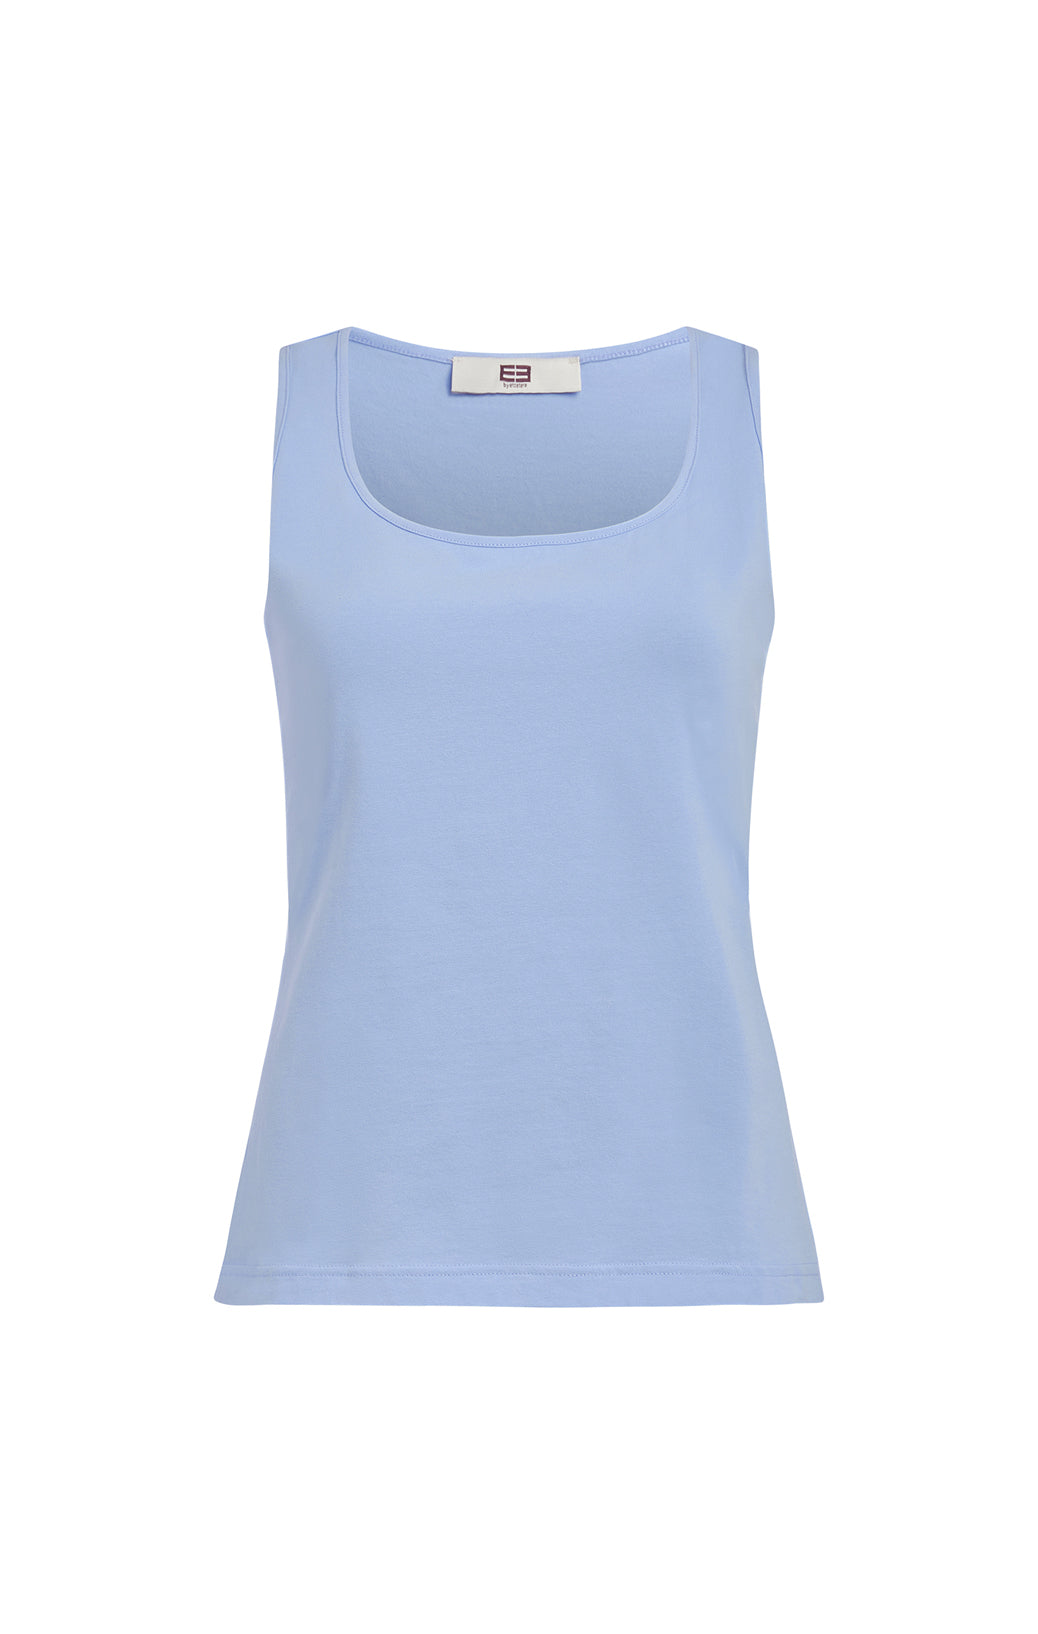 Laguna-Bge - Stretch Jersey Tank Top With Portrait Neck - Product Image